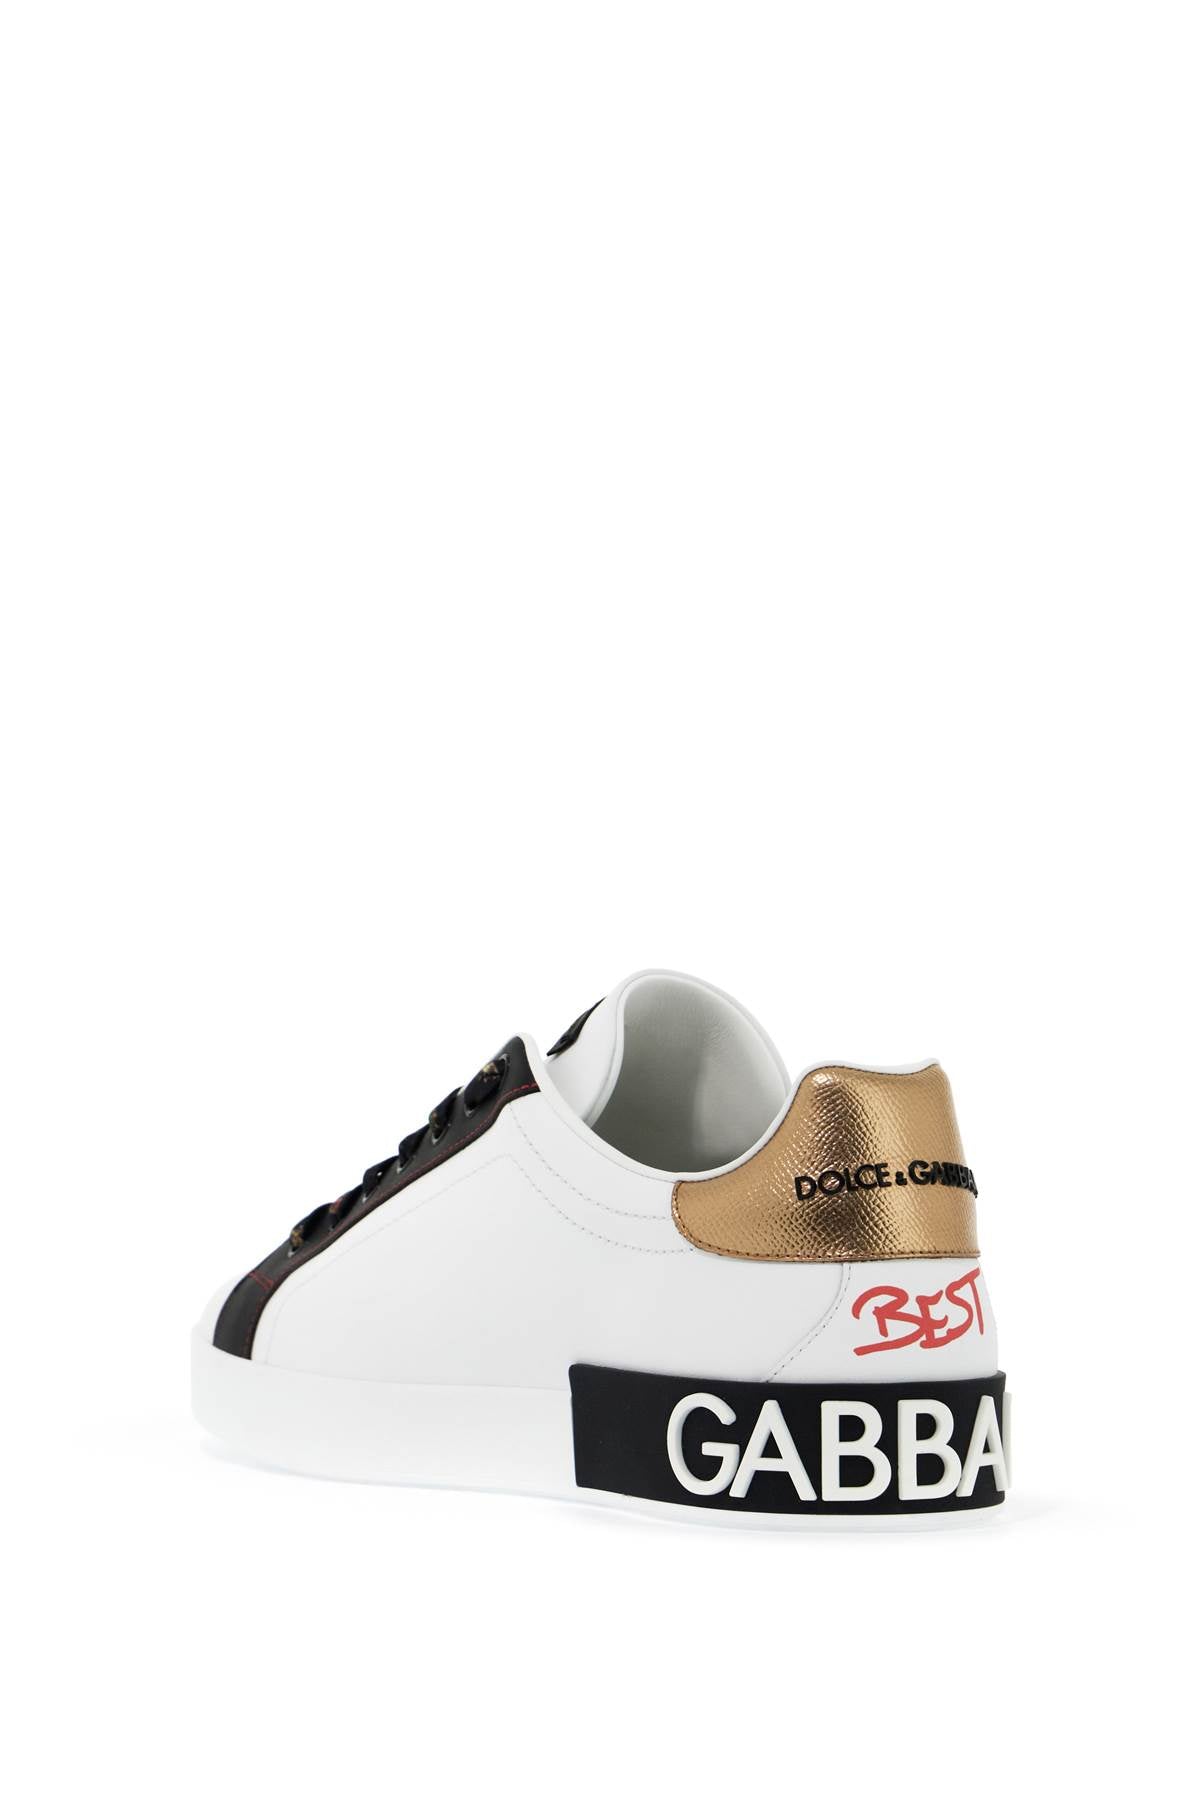 DOLCE & GABBANA PORTOFINO Sneaker WITH PATCHES AND Embroidered